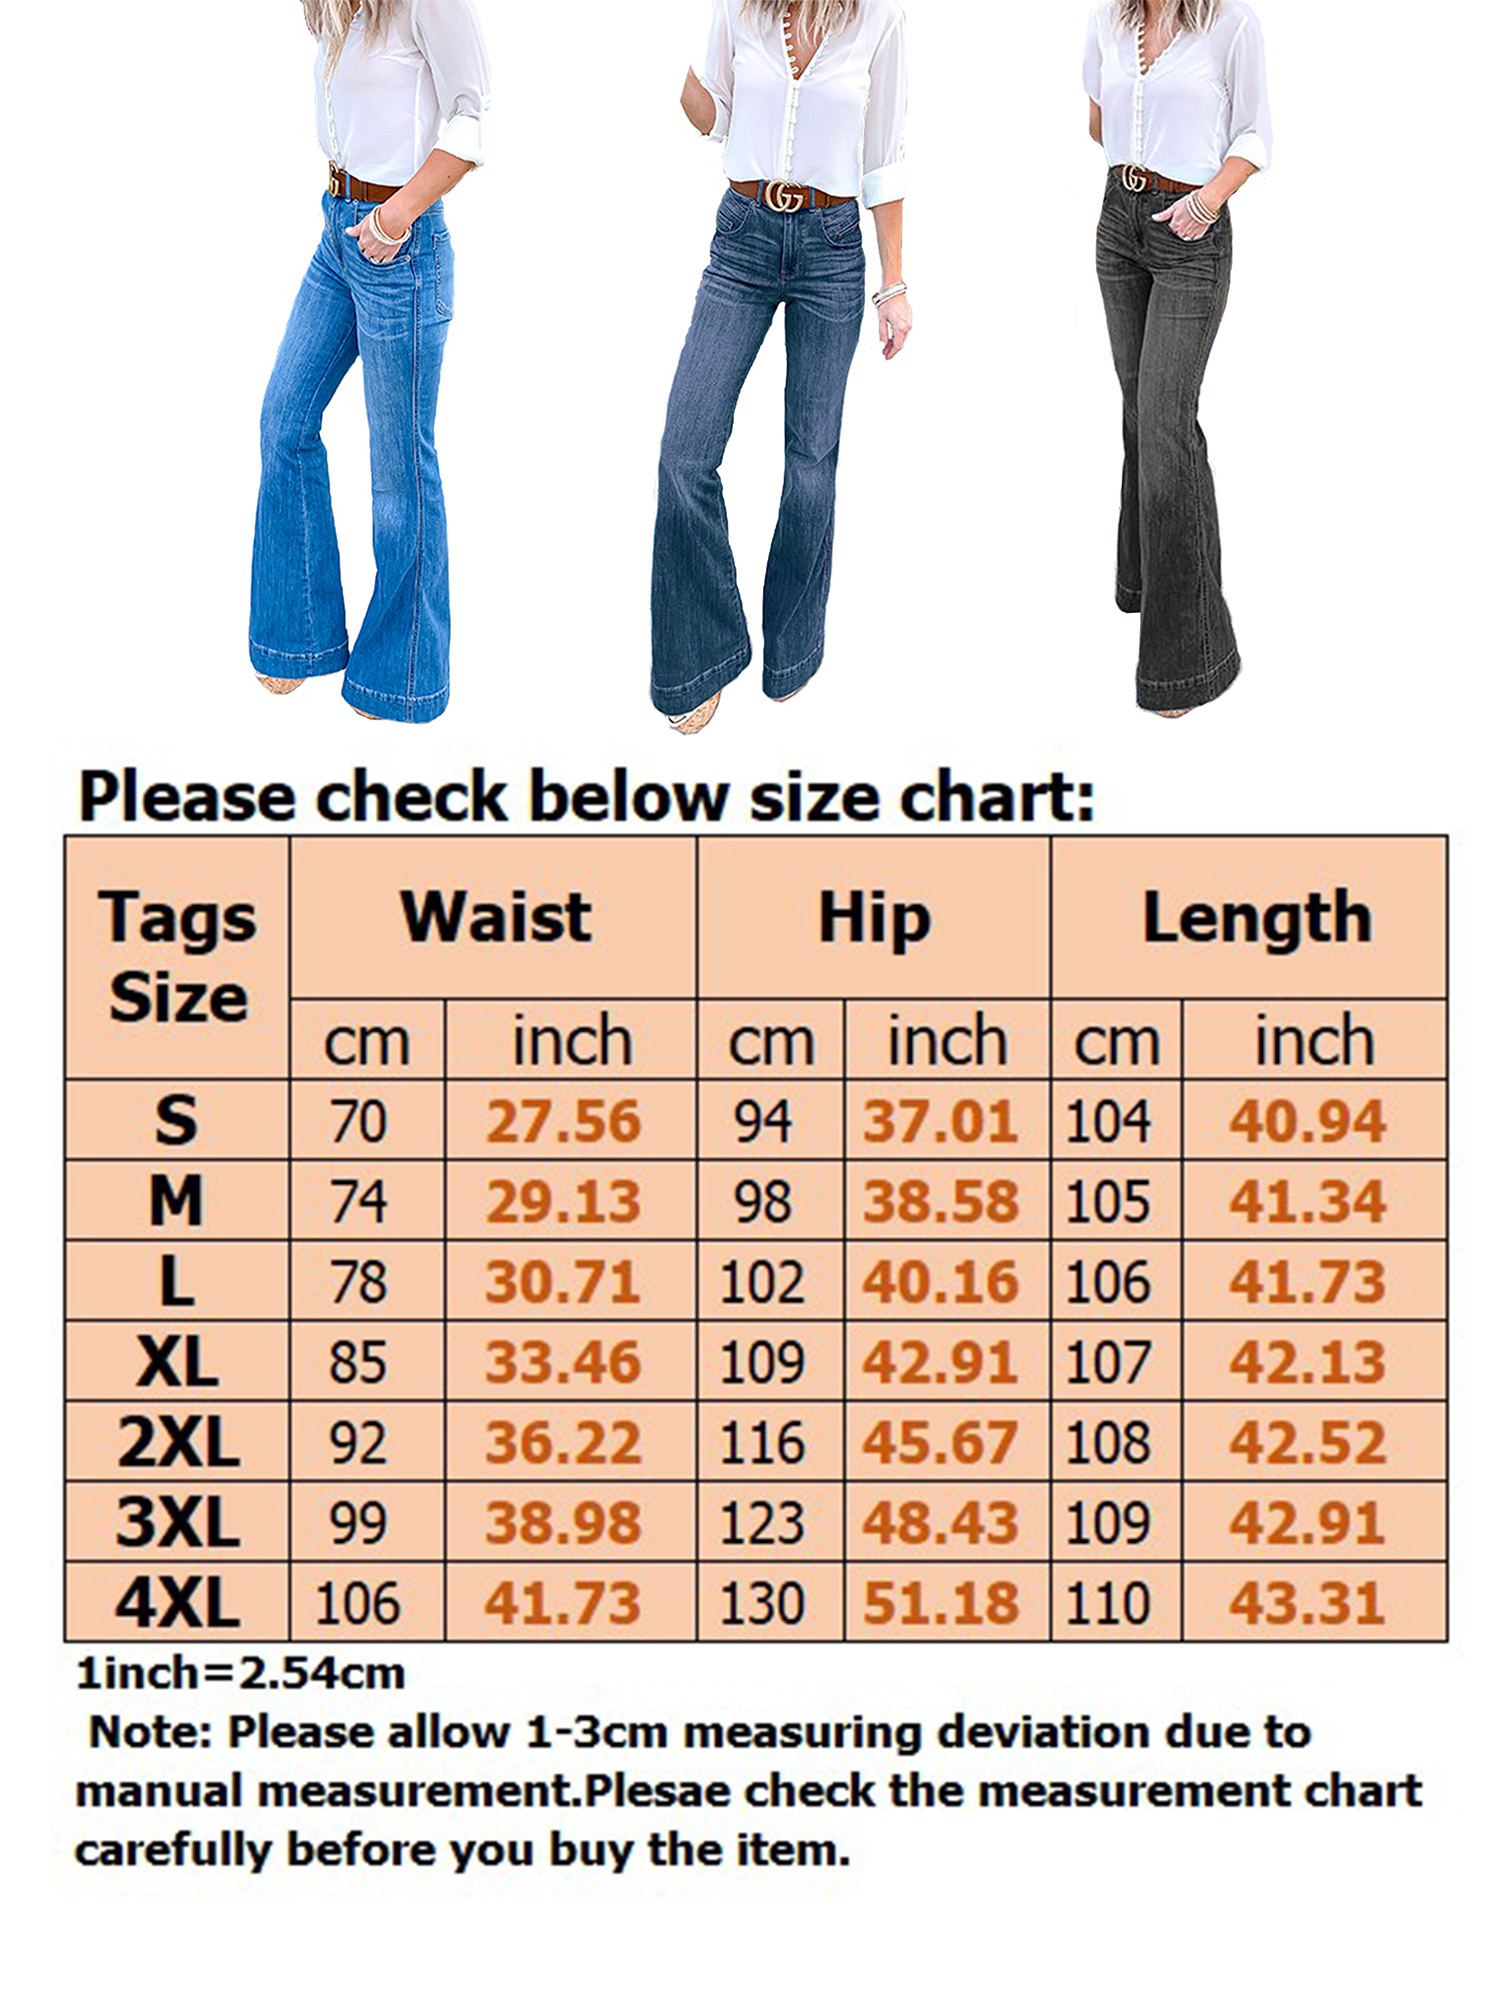 Avamo Retro Flared Jeans For Women Distressed Jeans Ladies Bell Bottoms Jeans Stretch Bootcut Denim Pants Casual Wide Leg Trousers - image 2 of 2